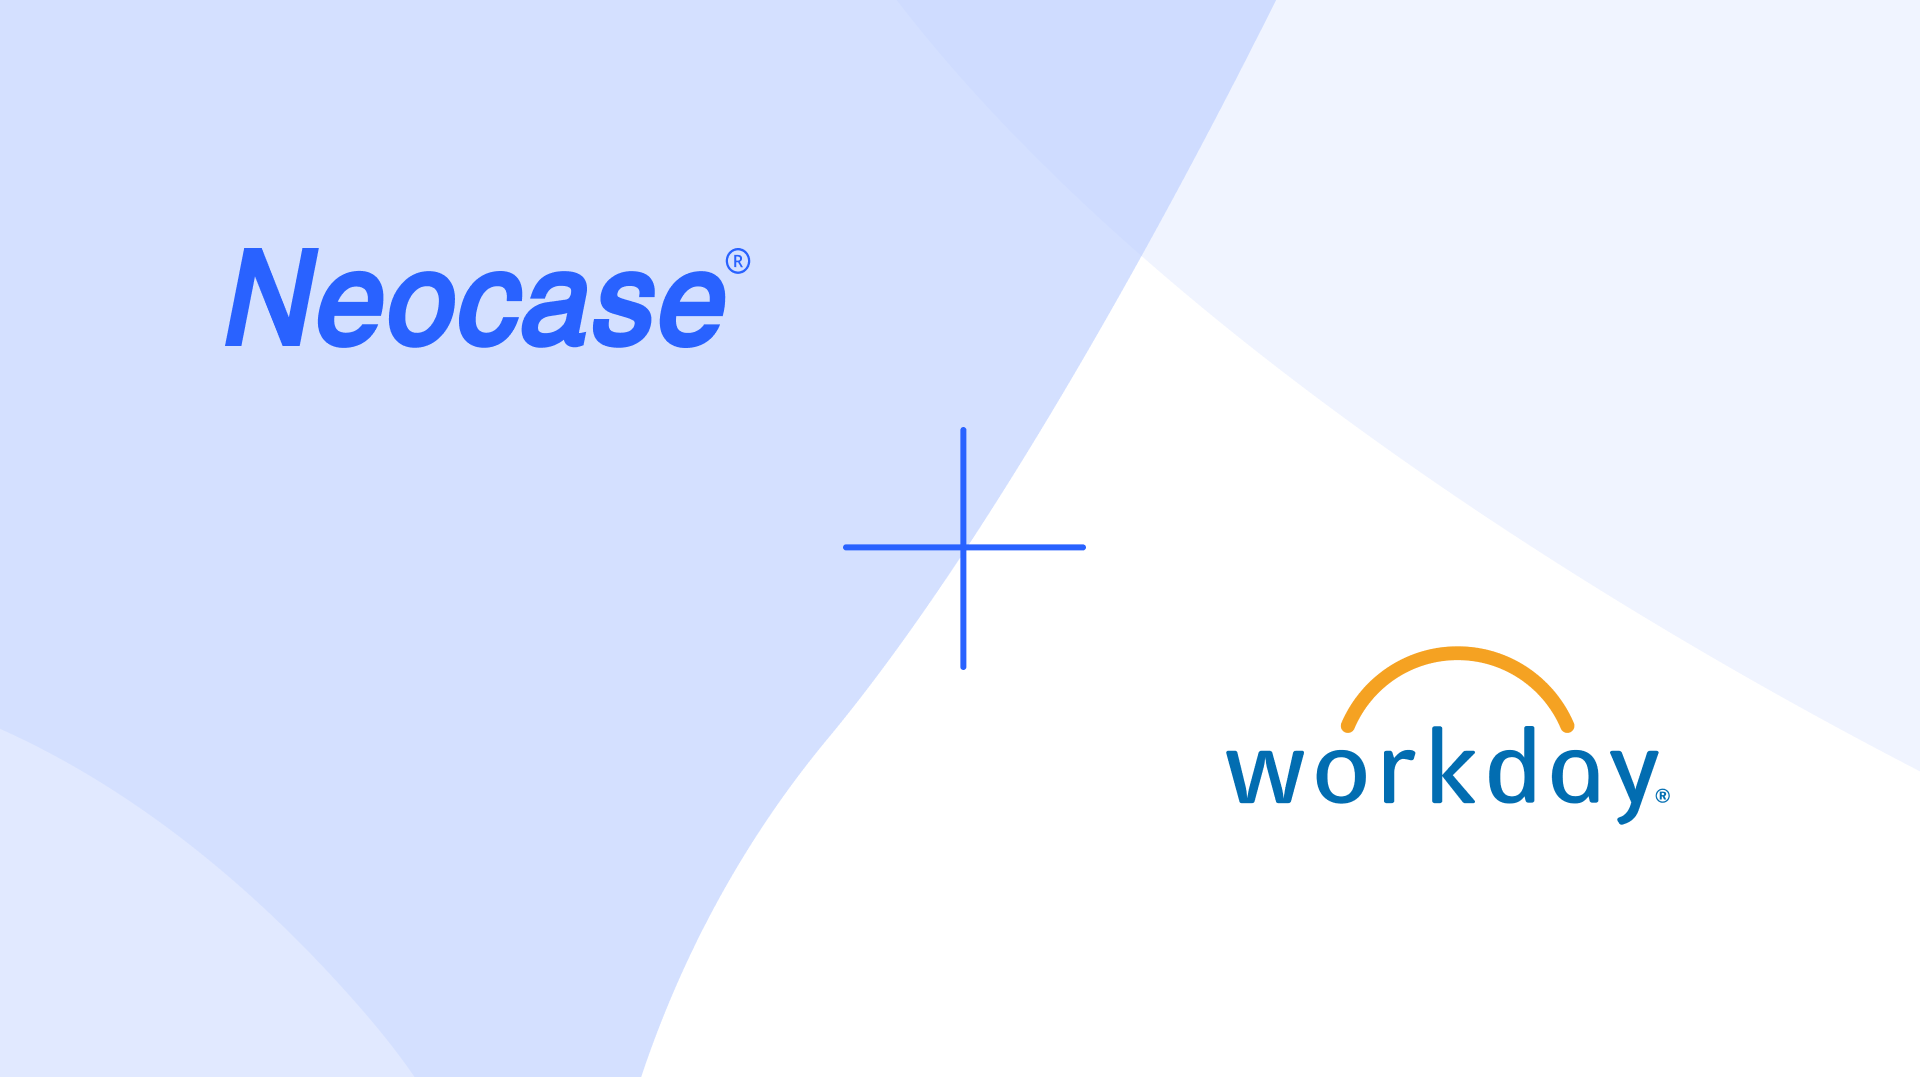 Neocase as a Workday partner